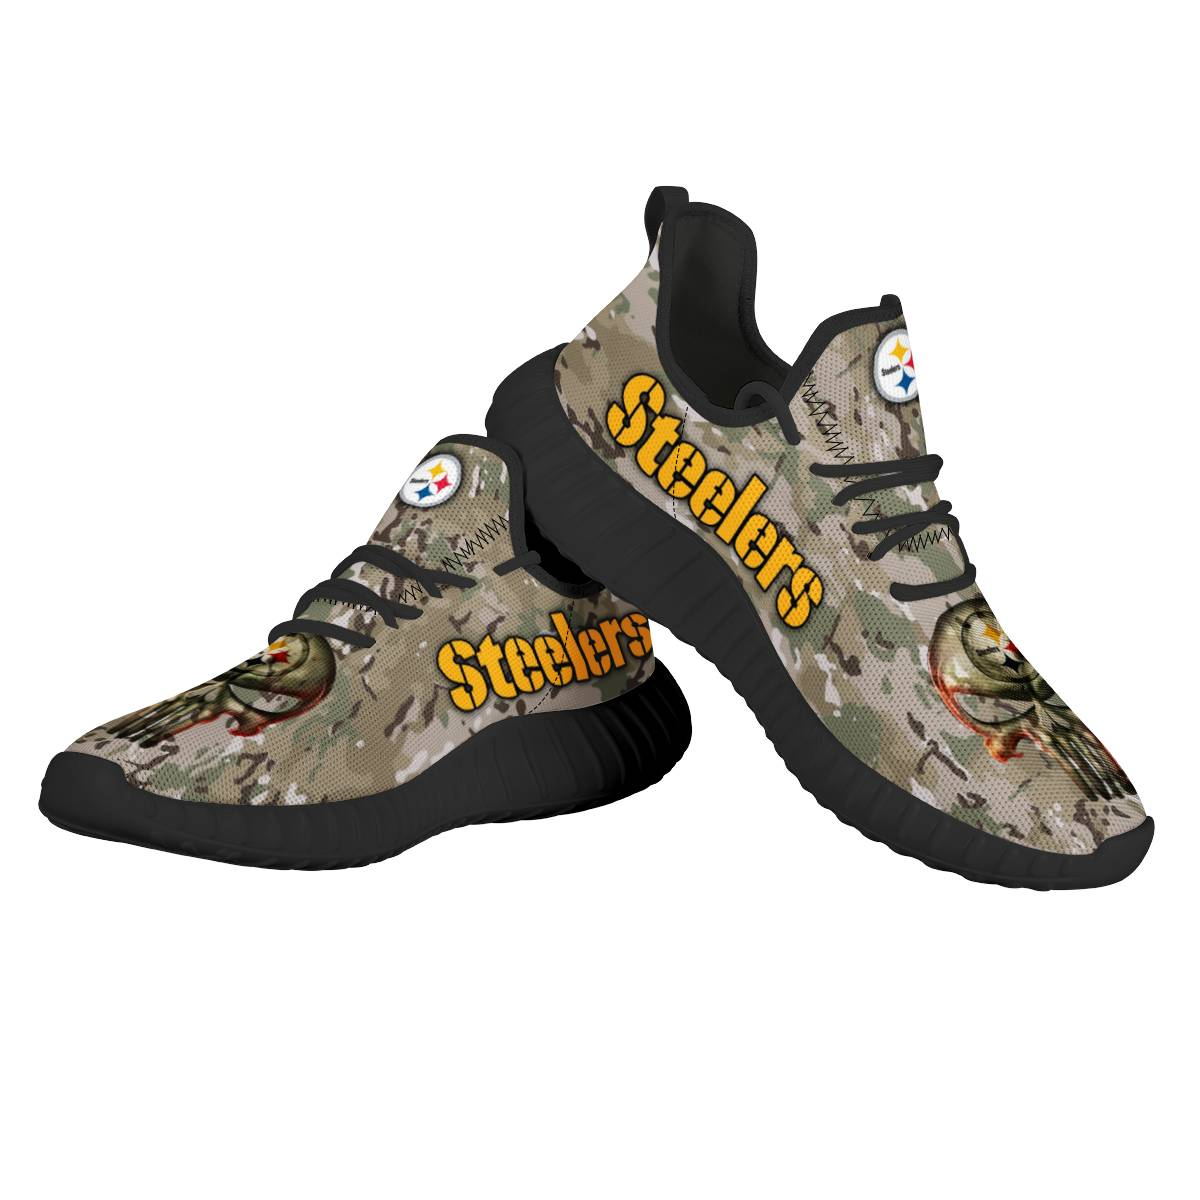 Women's NFL Pittsburgh Steelers Mesh Knit Sneakers/Shoes 010